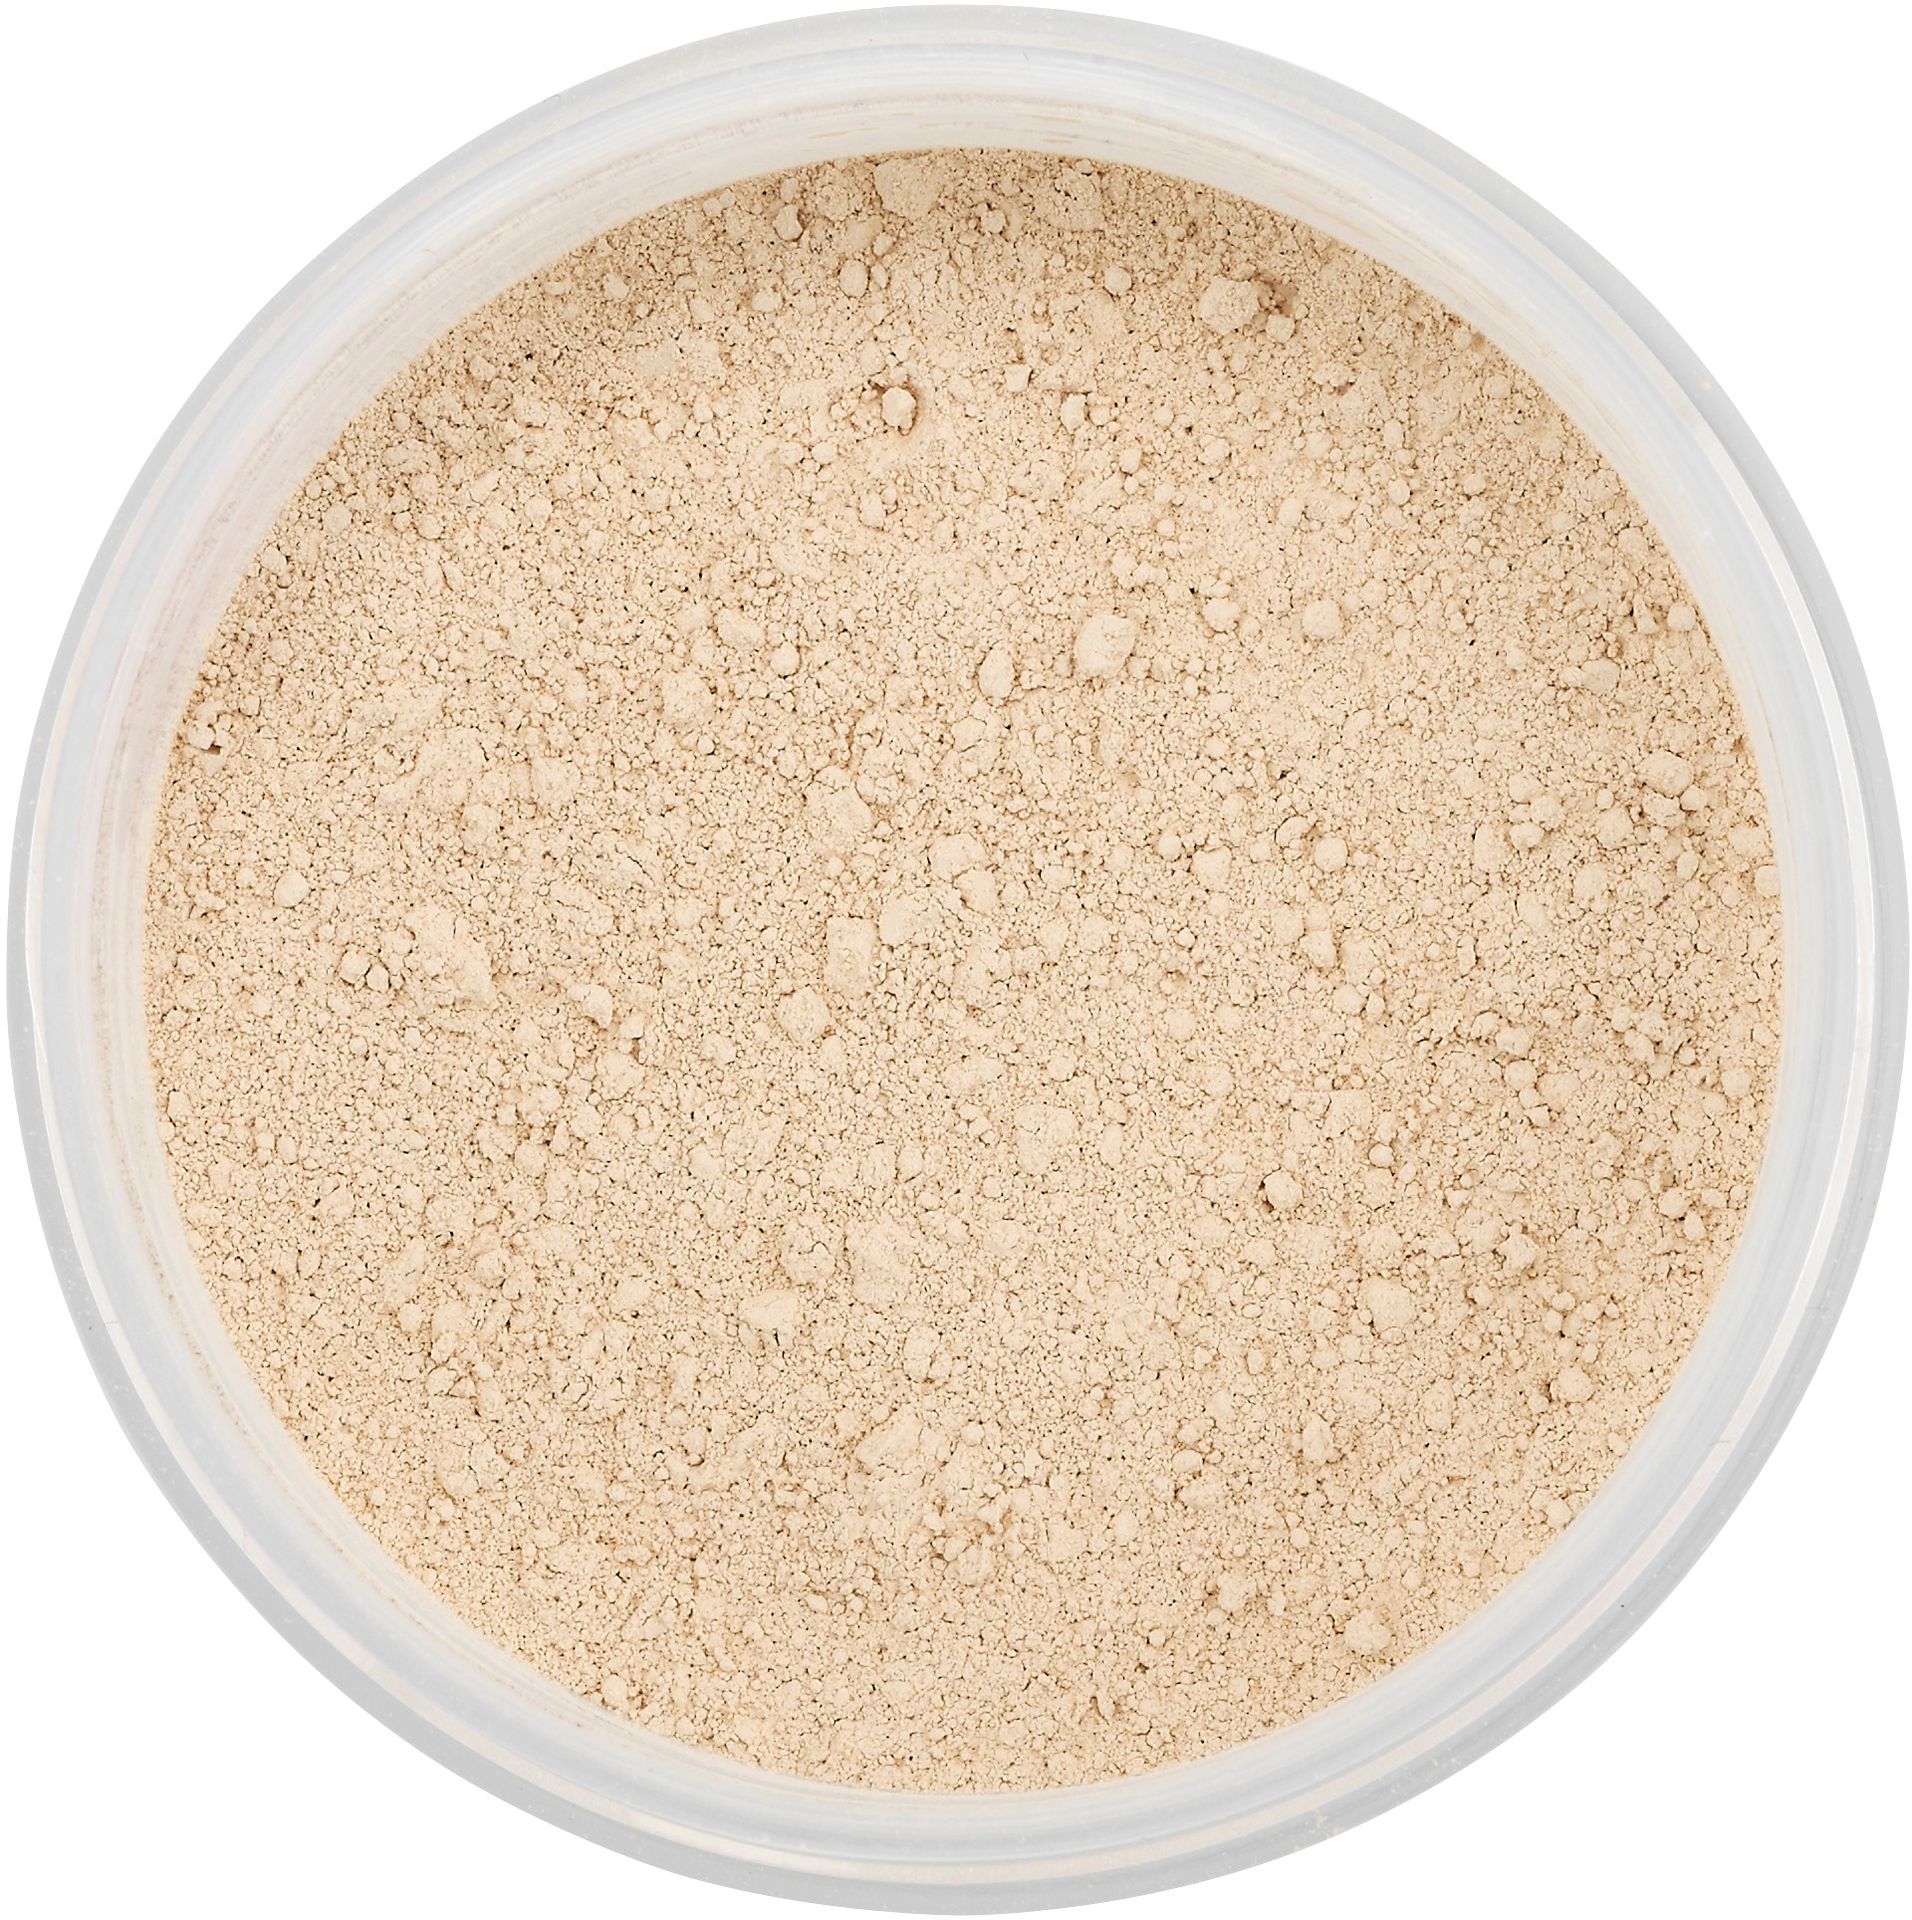 Lily Lolo Mineral Foundation Chiny Doll 10 G chinadoll_found